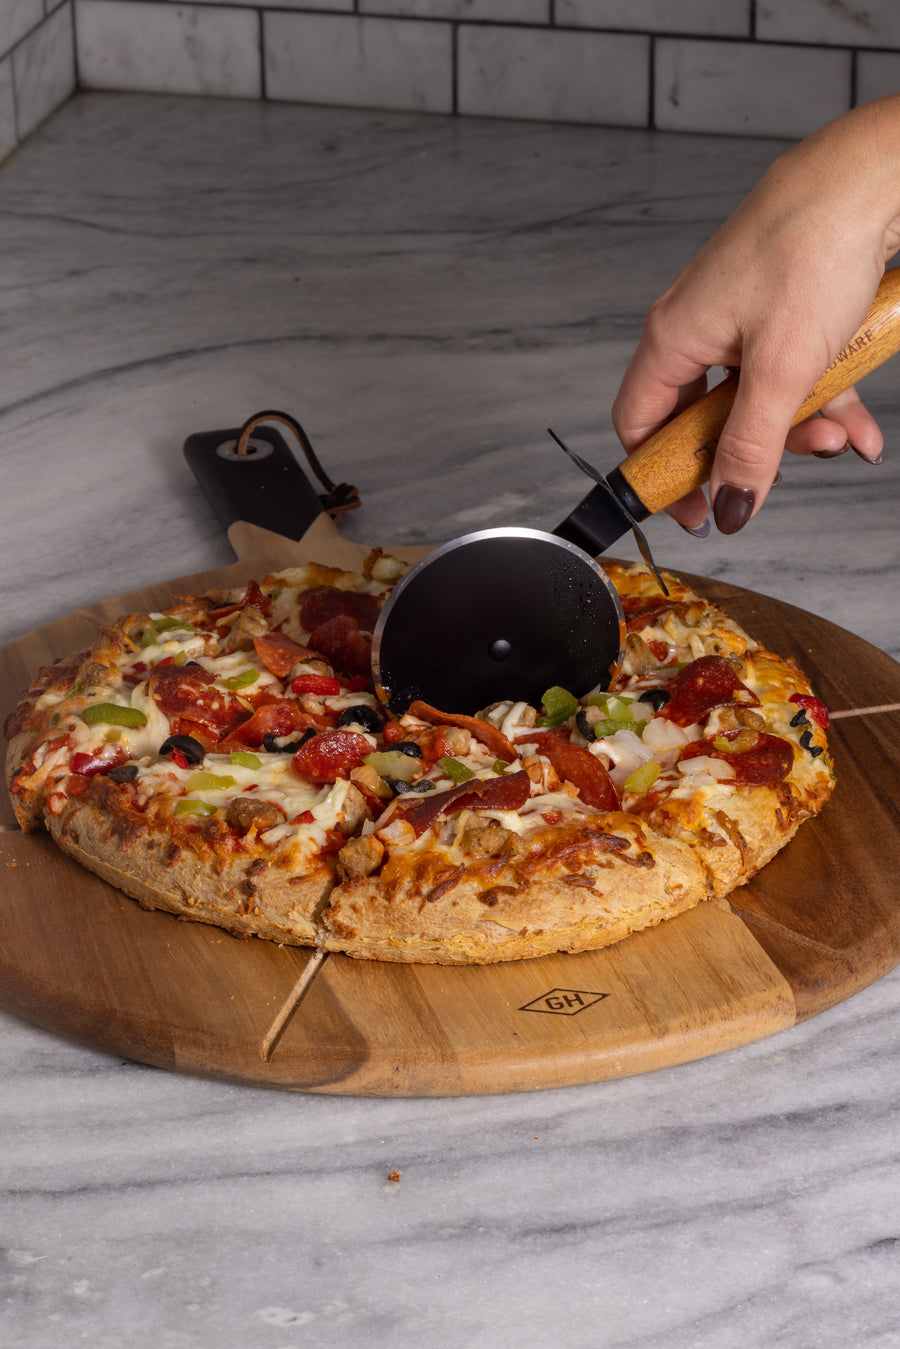 Acacia Wood Pizza Cutting Board and Pizza Cutter Set